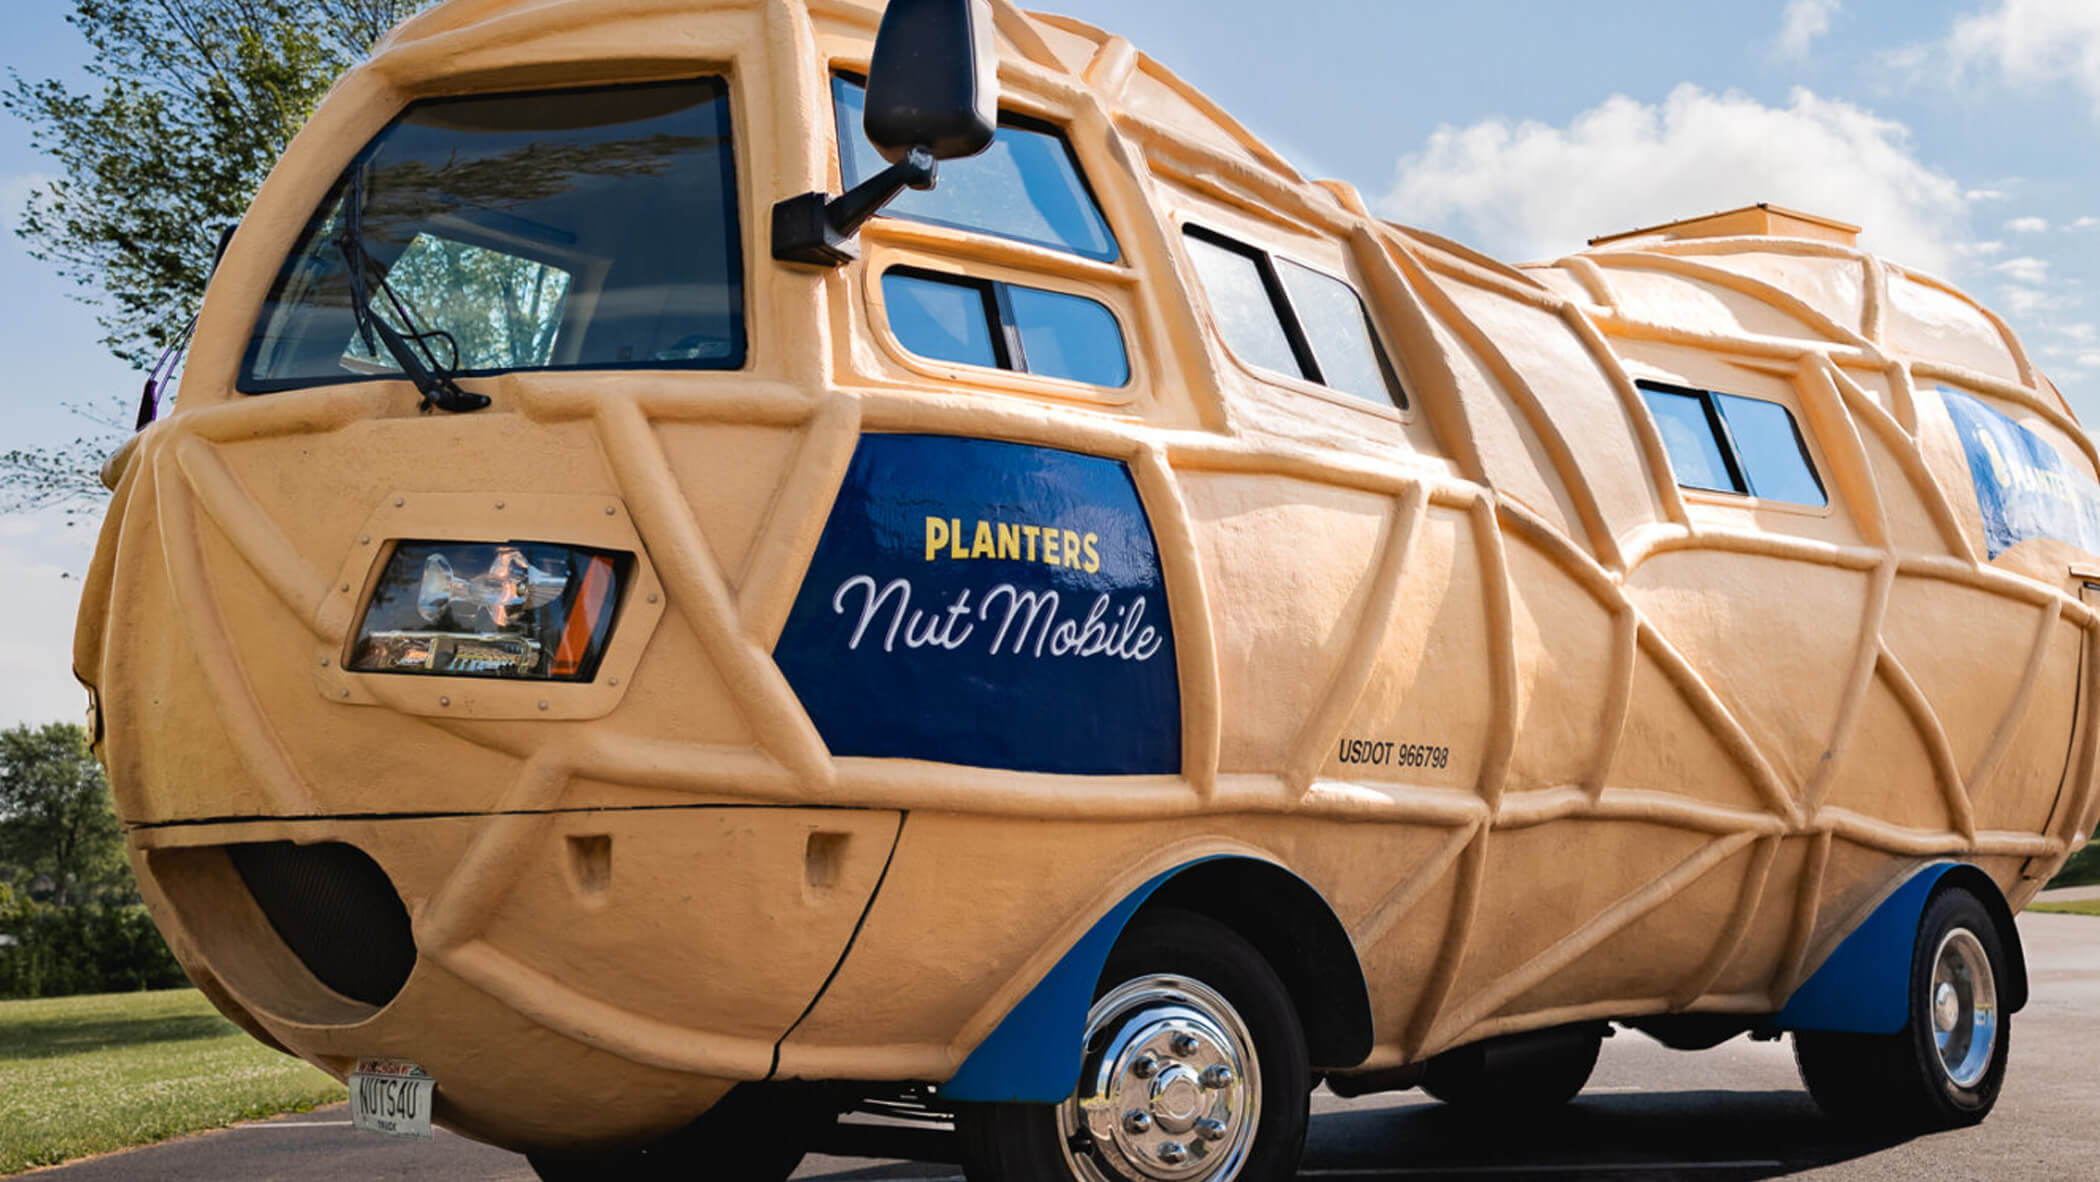 the Planters Nutmobile parked on the side of a road